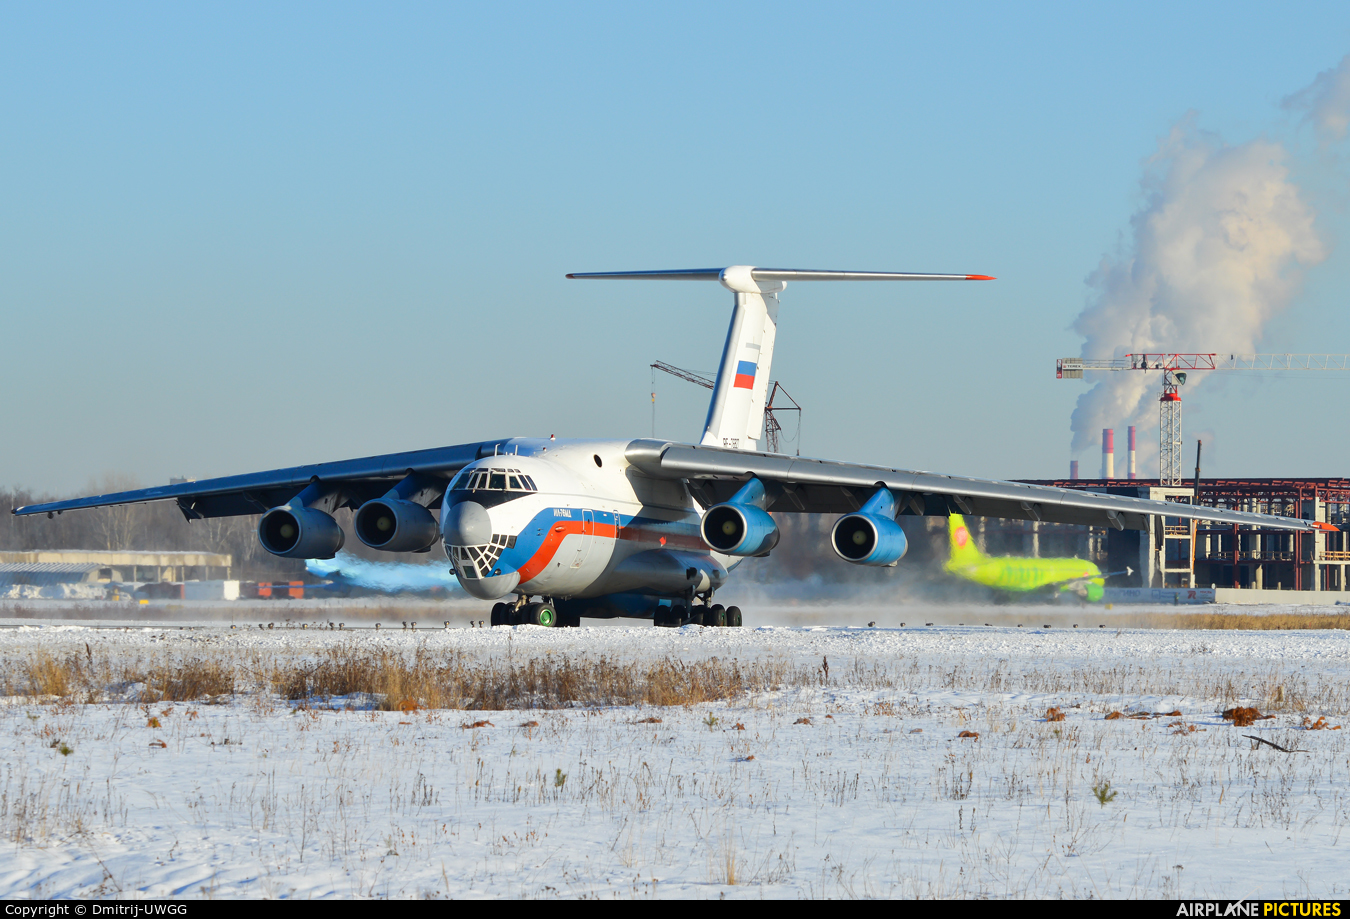 Russia - Ministry of Internal Affairs RF-76827 aircraft at Undisclosed Location